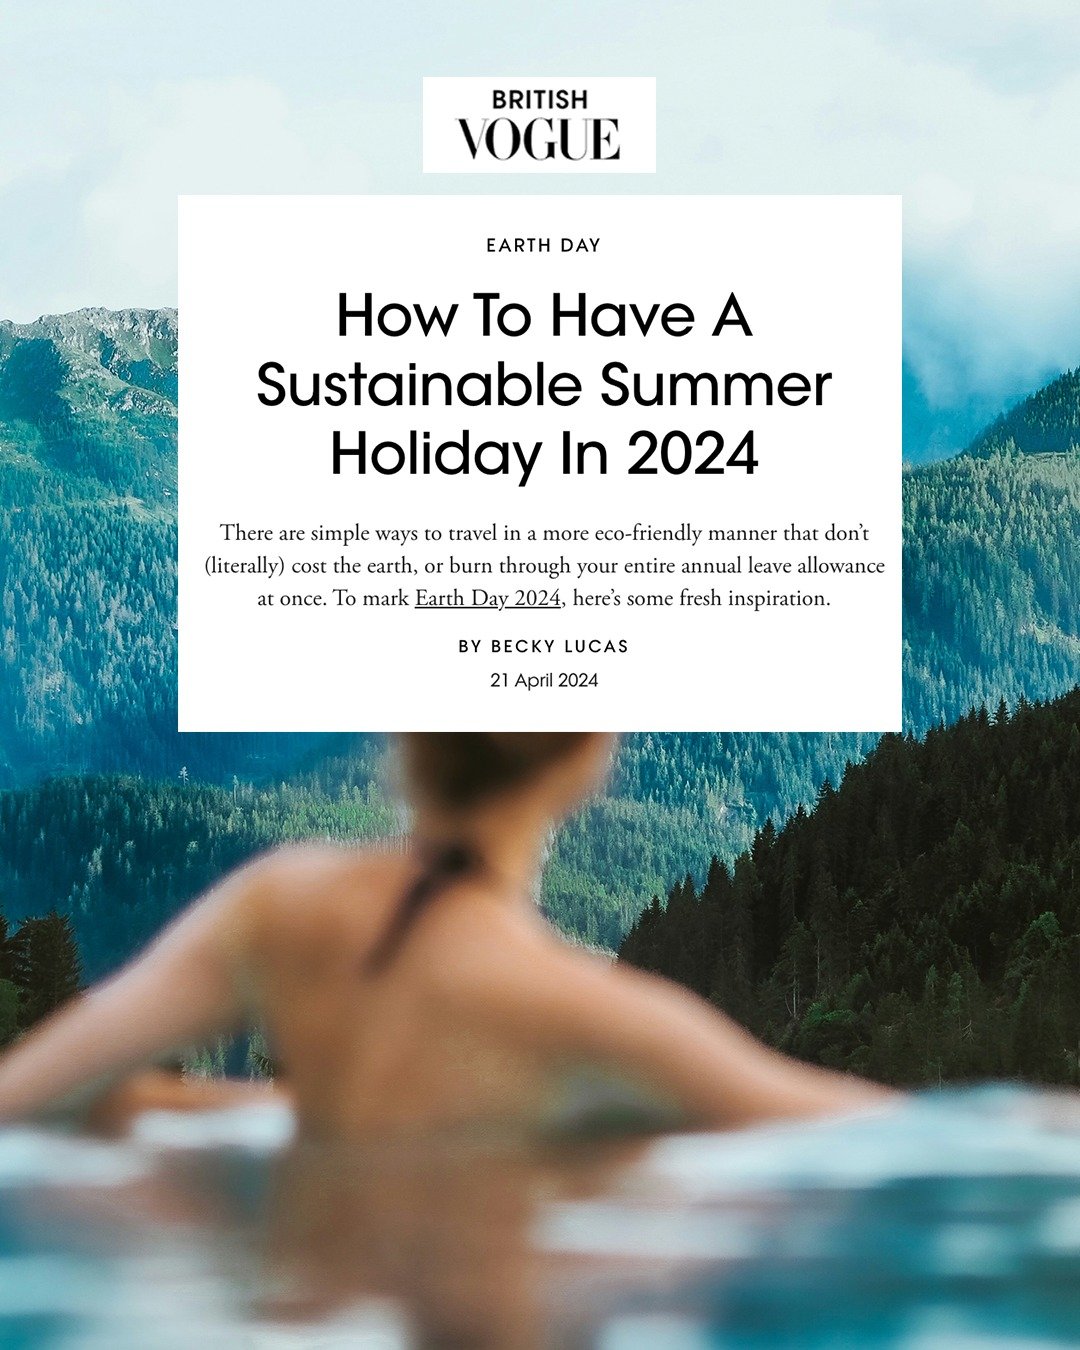 An insightful article in @britishvogue  by @beckyamylucas on sustainable summer holidays ☀️

Summer tends to be peak travel season (though climate change is starting to cause a shift in these patterns), but there are a few ways to limit the impact of